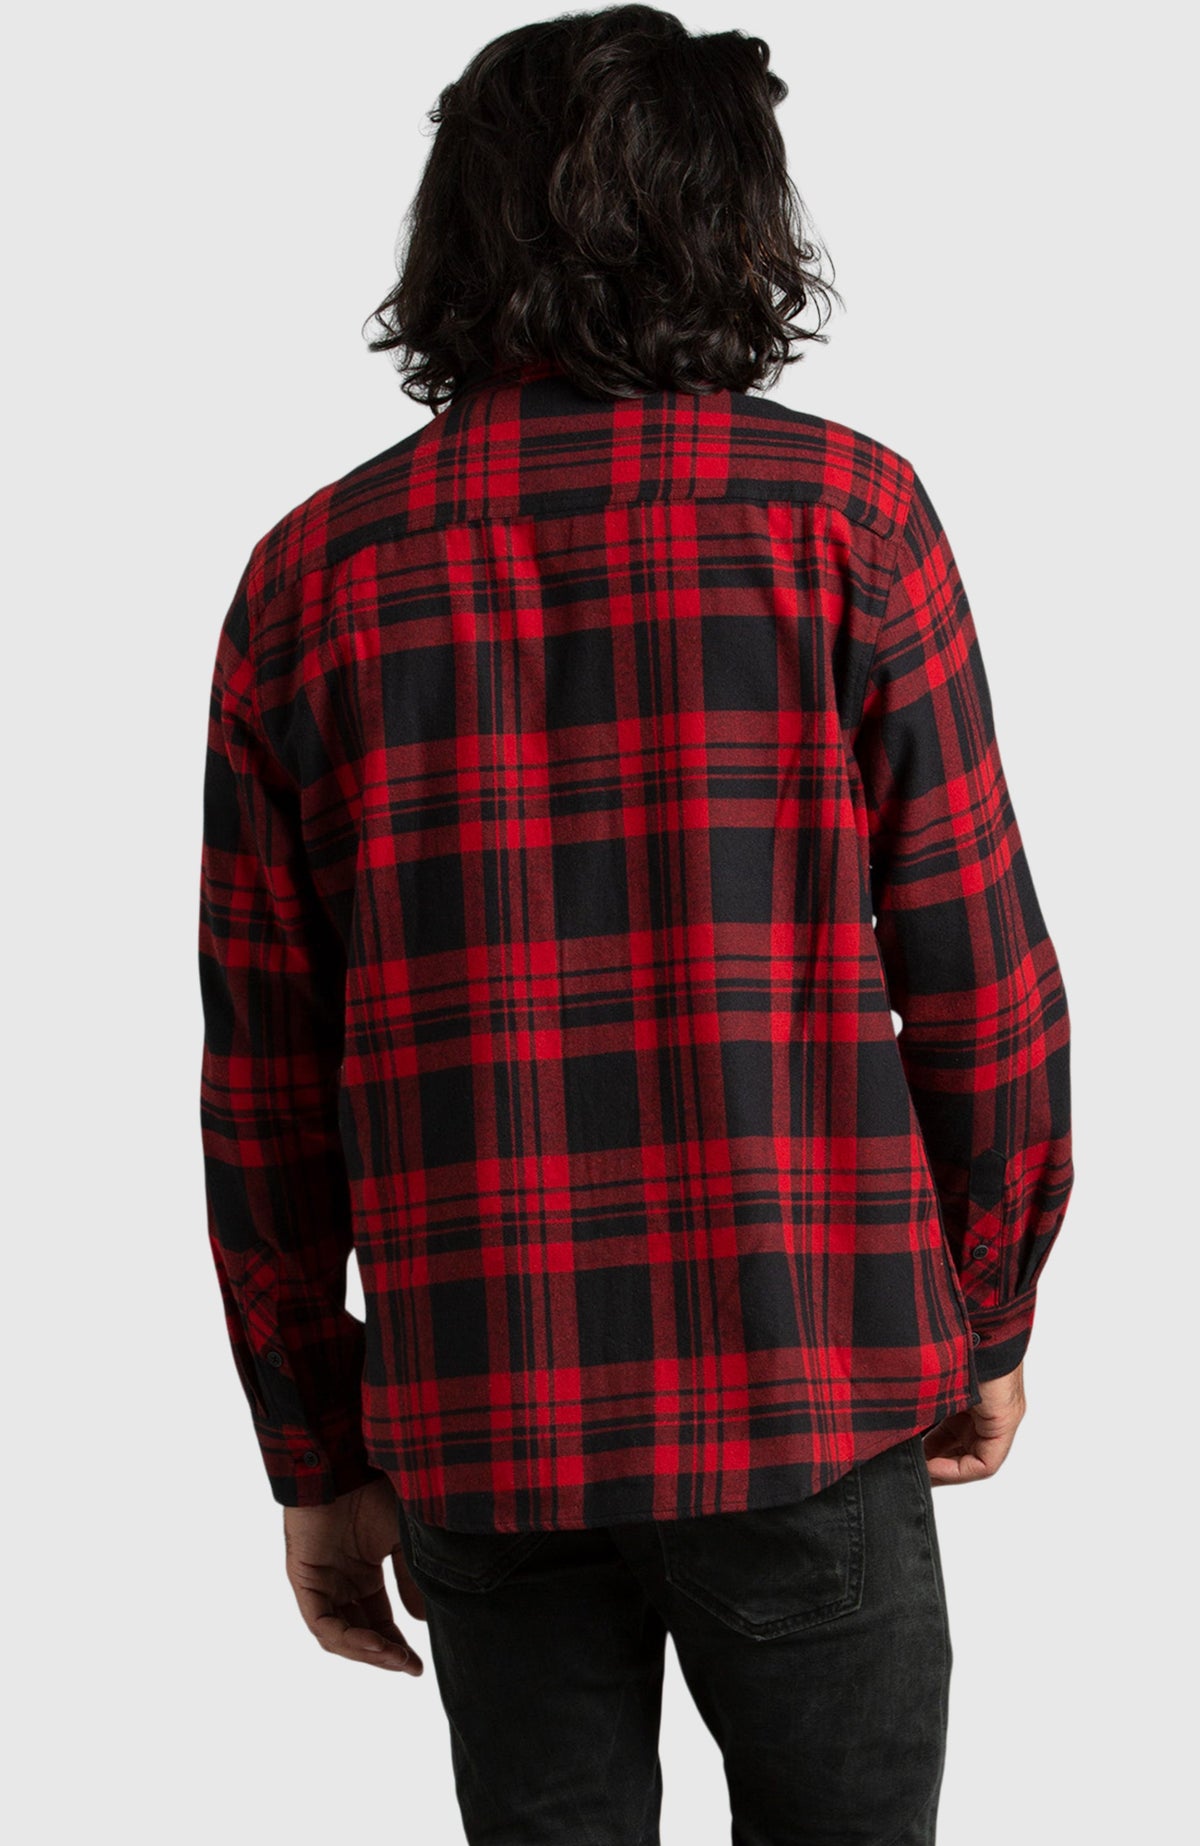 Red Buffalo Plaid Flannel Shirt for Men - Back